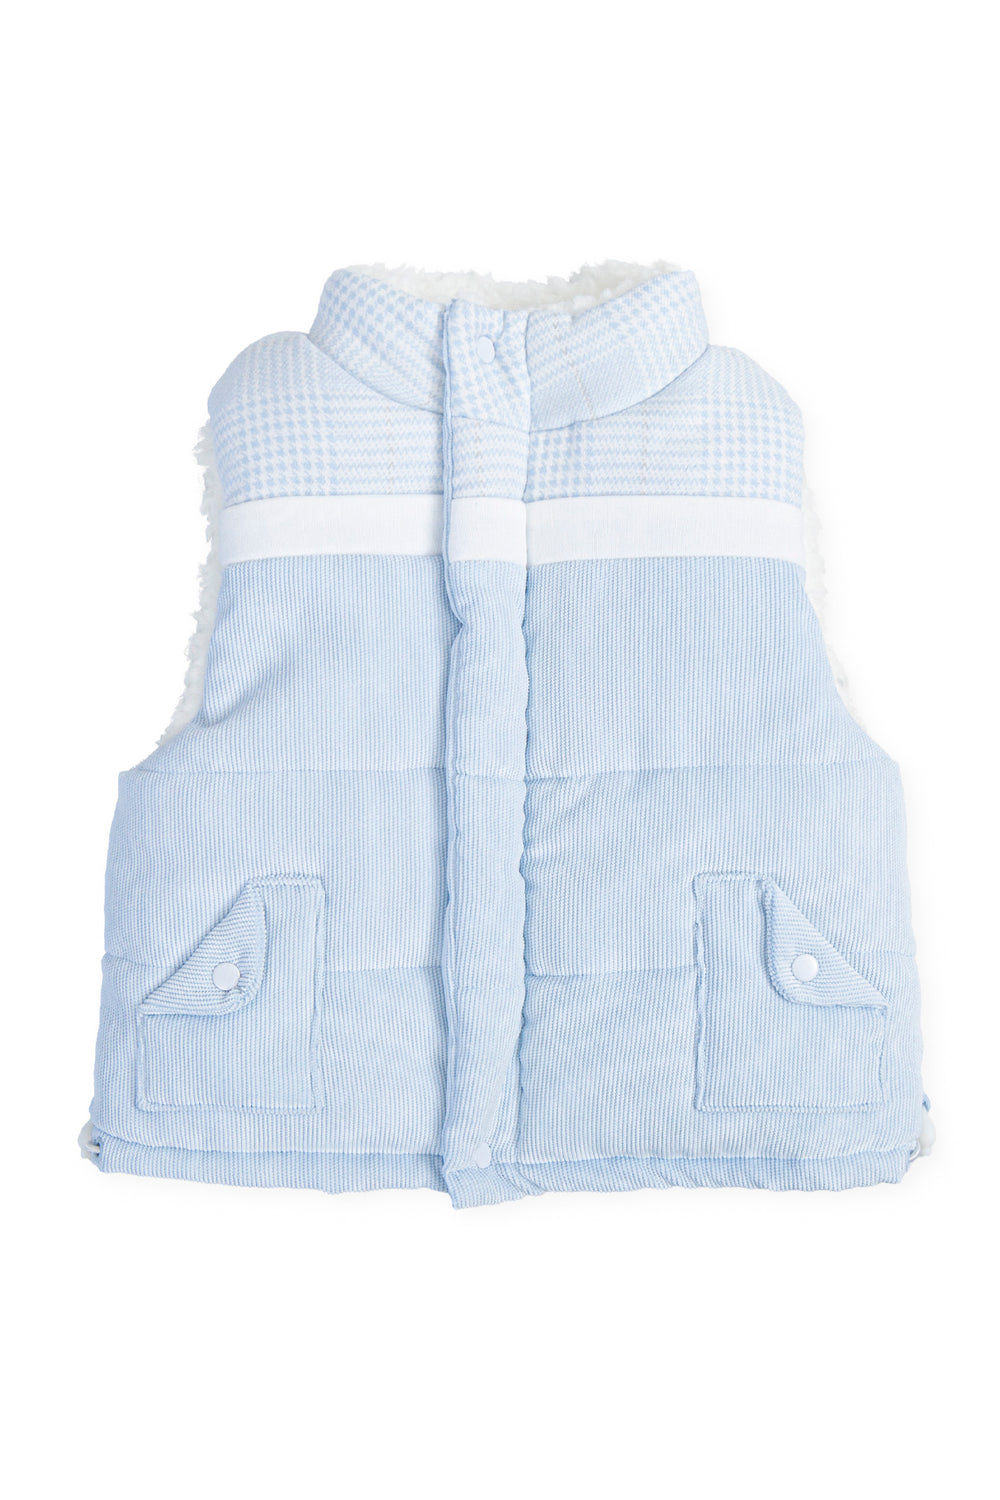 Tutto Piccolo "Arthur" Blue Cord Sherpa Lined Gilet | iphoneandroidapplications